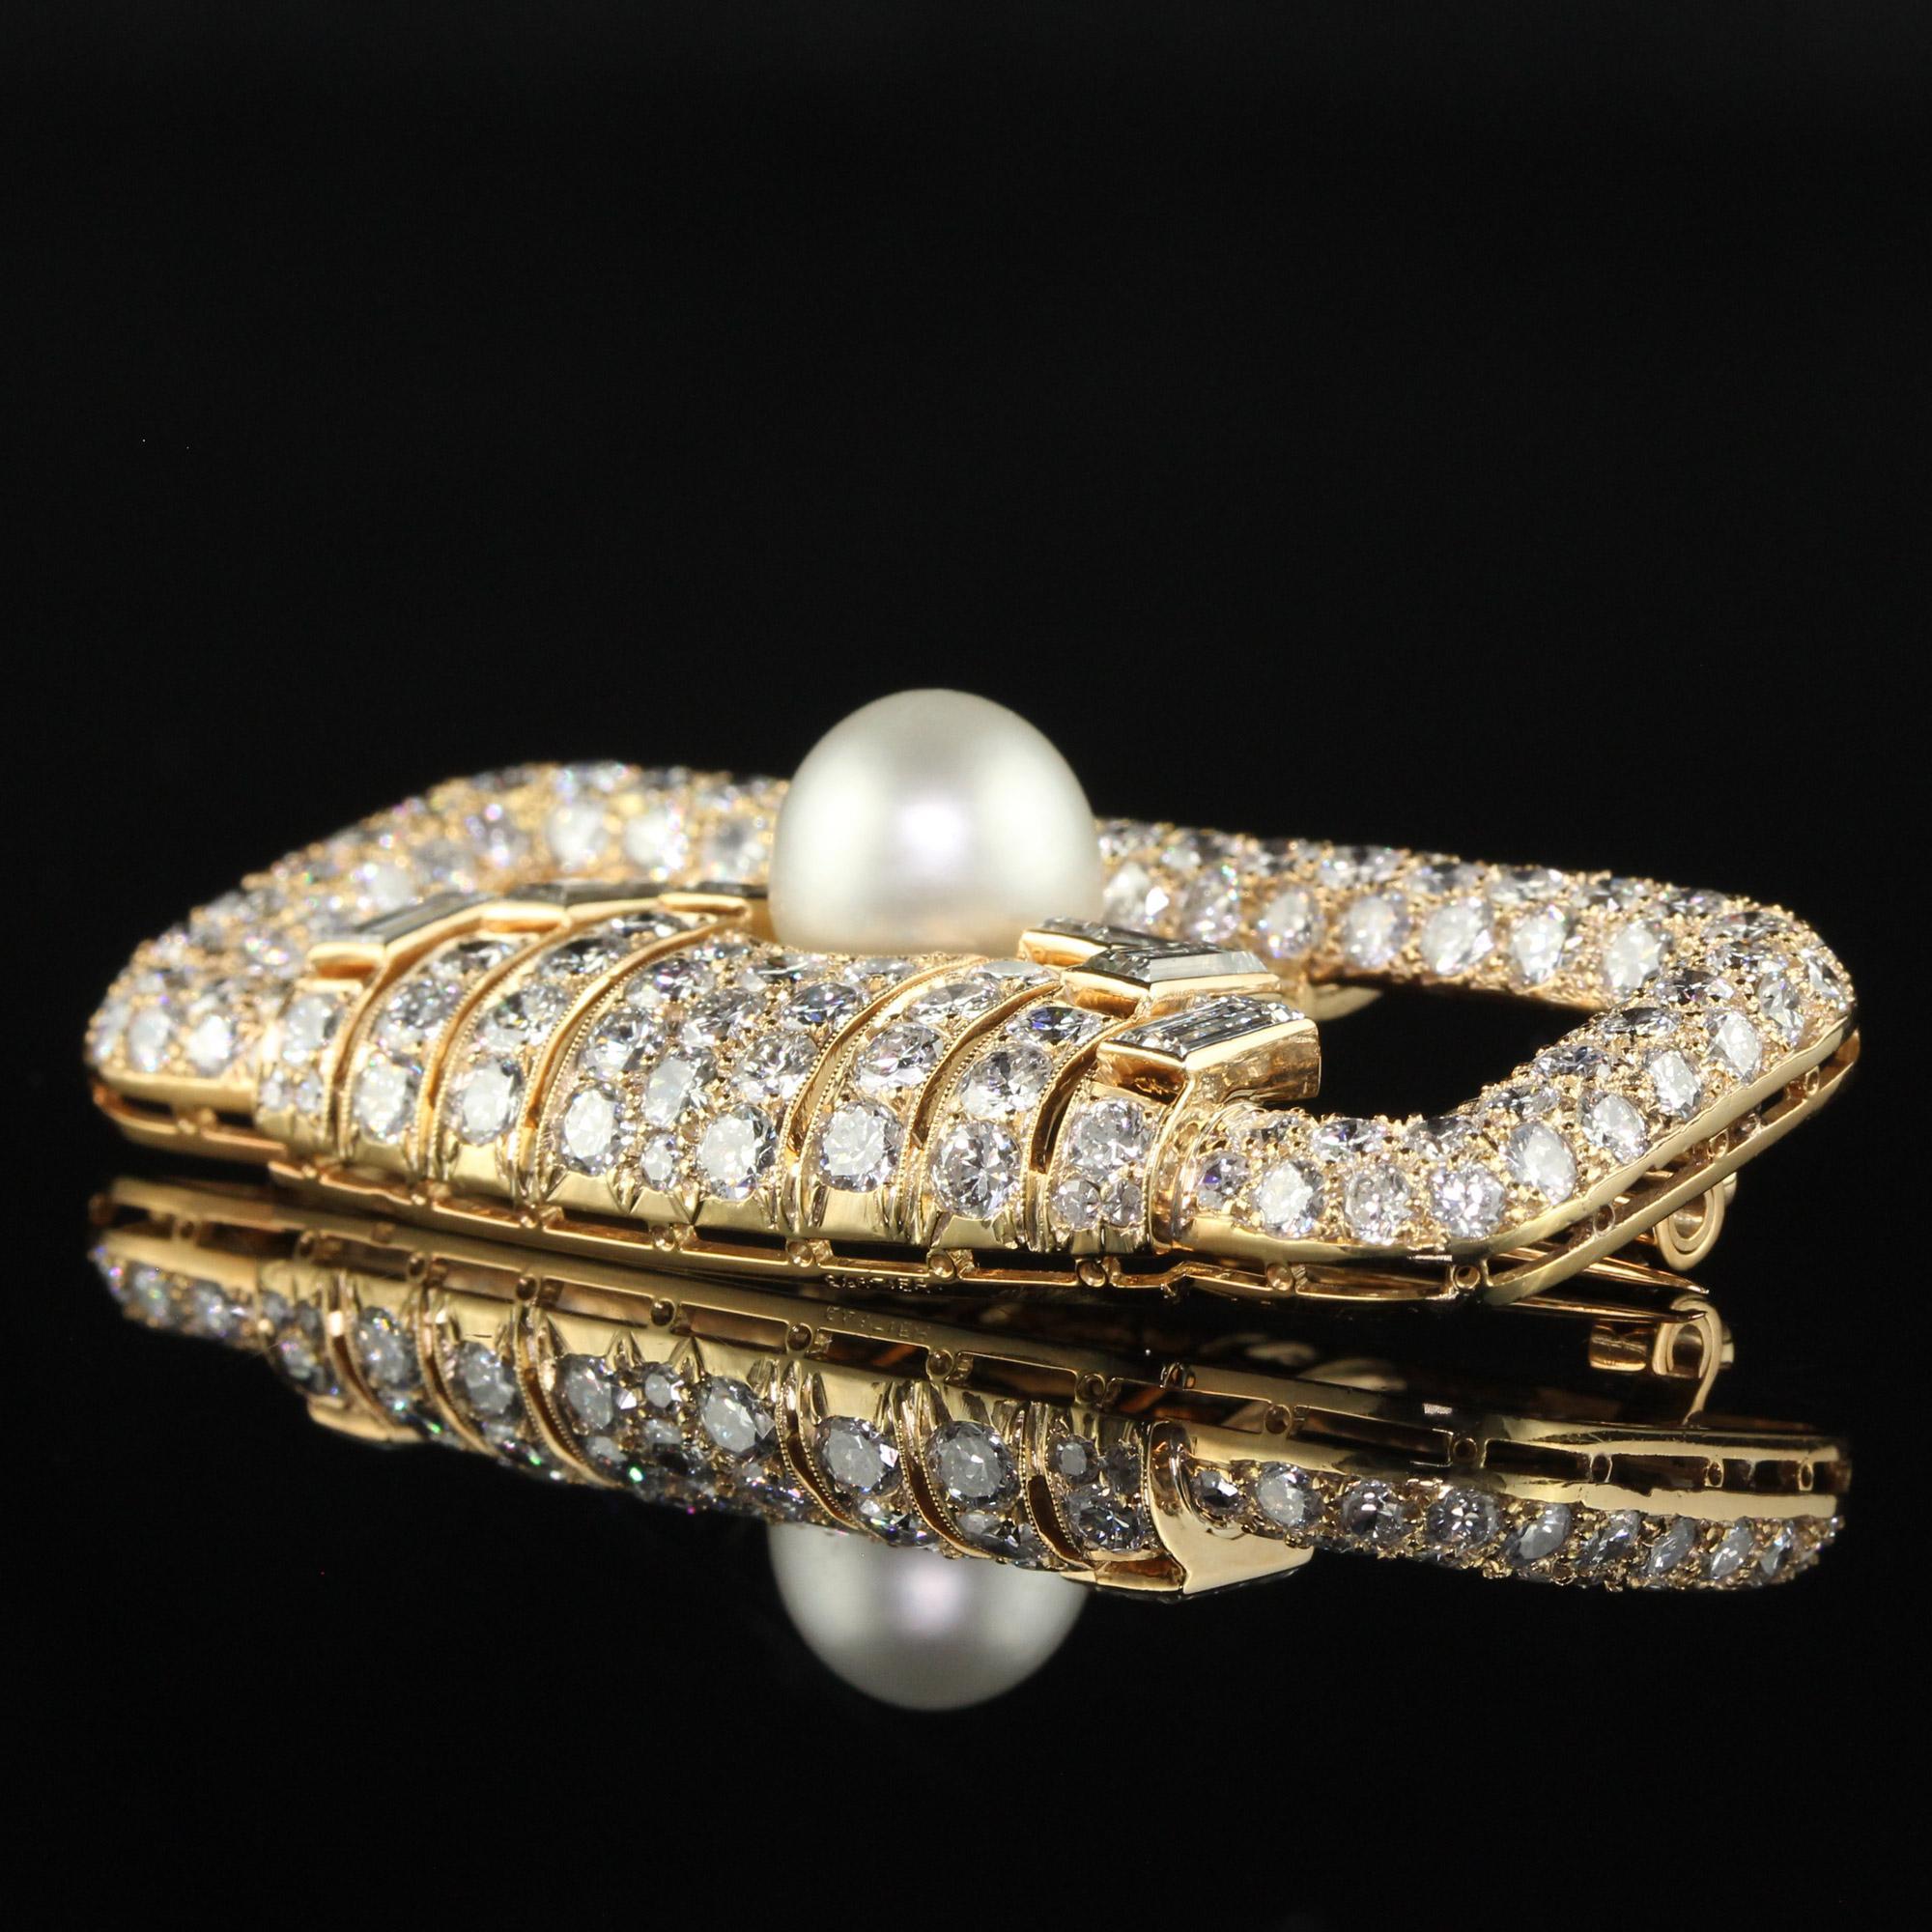 Vintage Retro Cartier 18K Yellow Gold Diamond Natural Pearl Brooch Pin - GIA For Sale 4